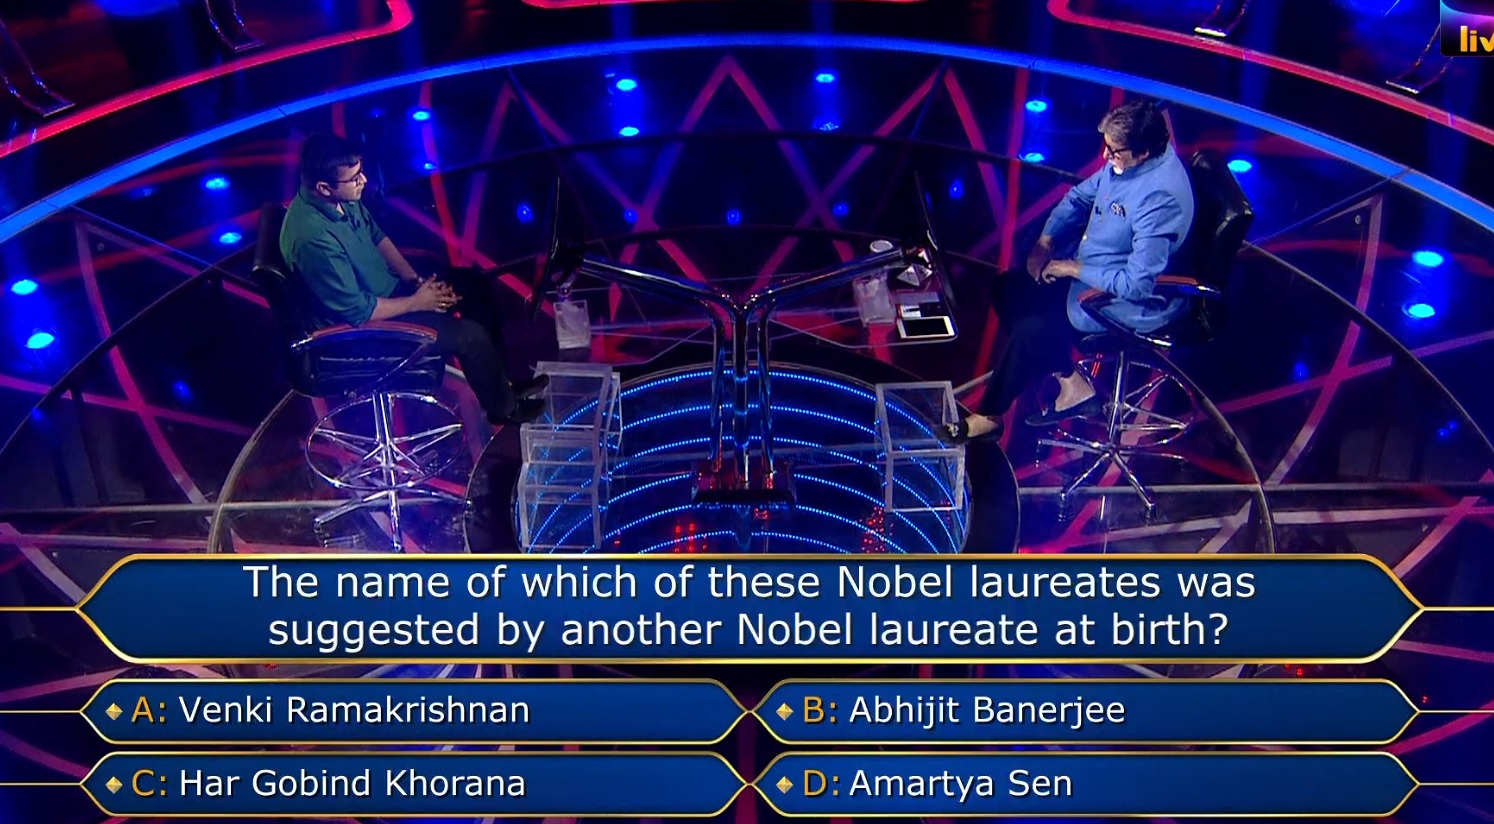 Ques : The name of which of these Nobel laureates was suggested by another Nobel laureate at birth?